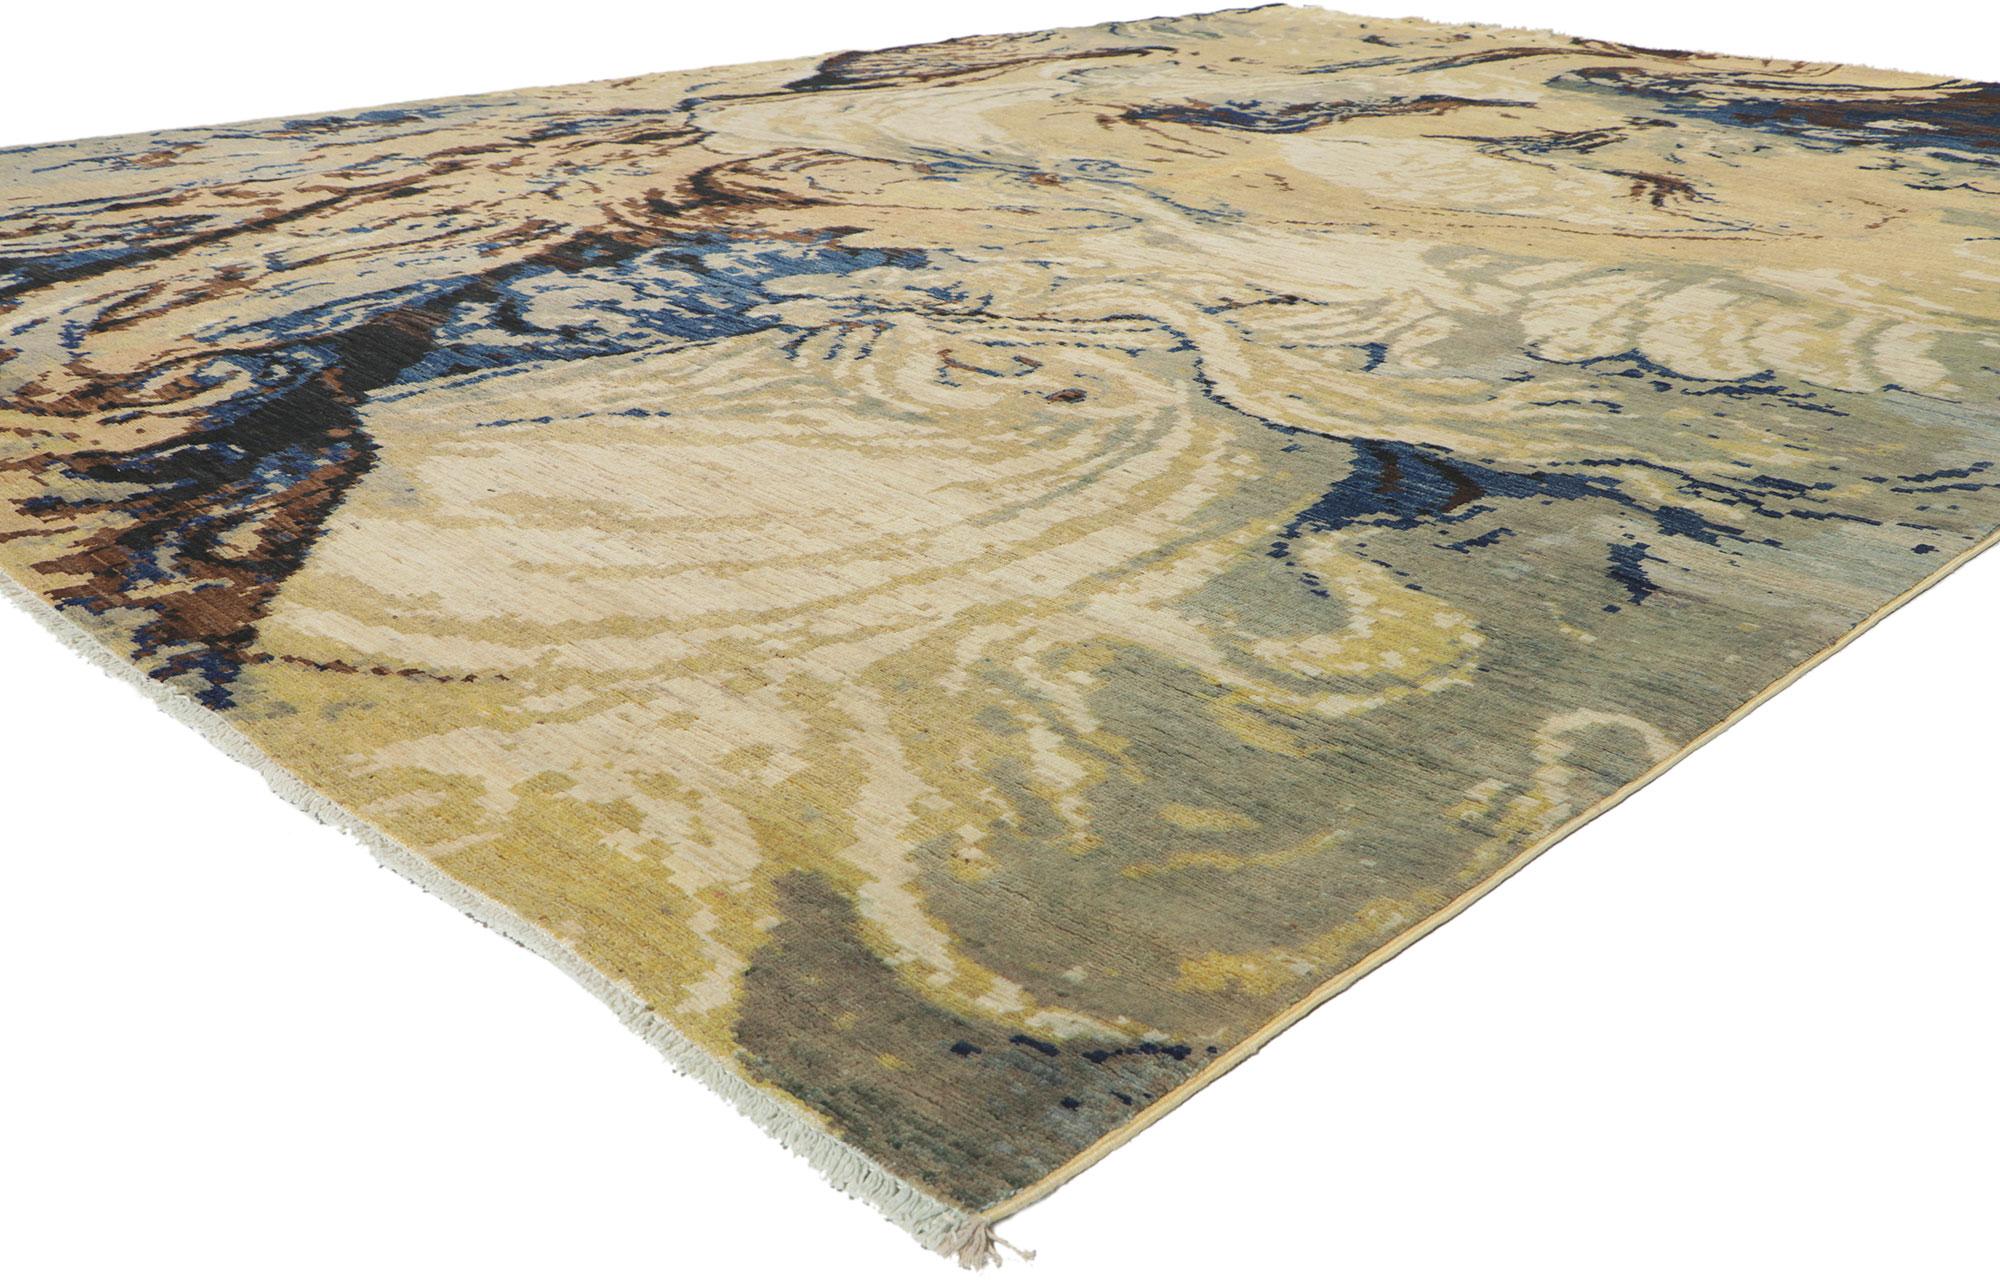 80755 New Contemporary Area Rug with Biophilic Design 09'05 x 12'09.
Showcasing an abstract biophilic design with incredible detail and texture, the hand-knotted wool contemporary rug is a captivating vision of woven beauty. The mesmerizing